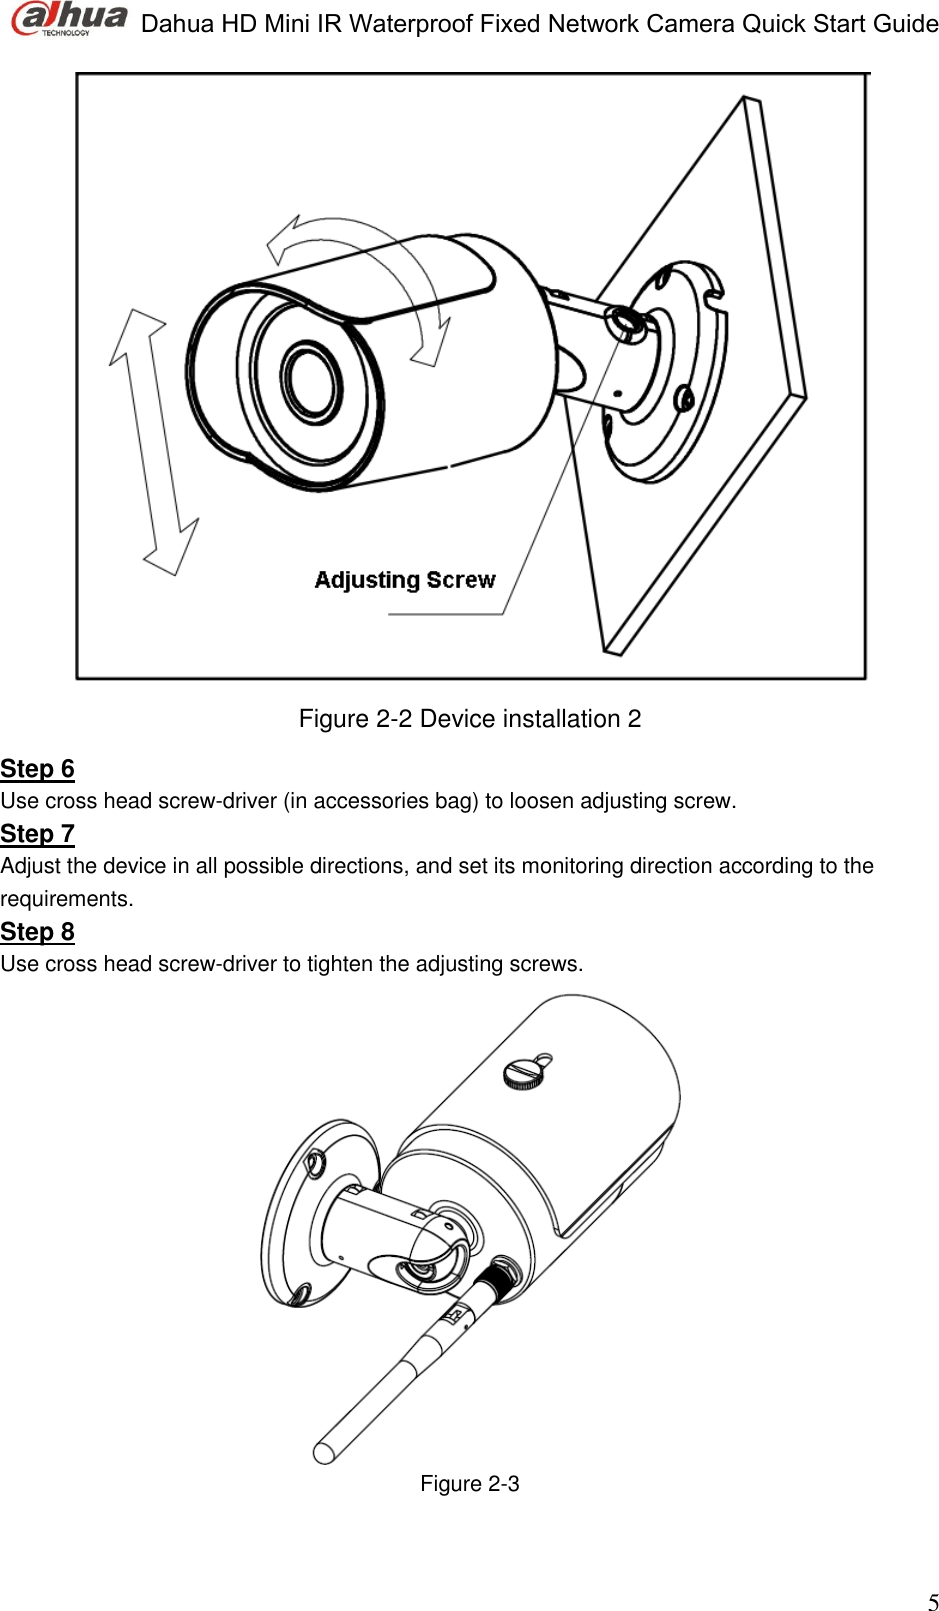  Dahua HD Mini IR Waterproof Fixed Network Camera Quick Start Guide                                                                               5  Figure 2-2 Device installation 2 Step 6 Use cross head screw-driver (in accessories bag) to loosen adjusting screw.  Step 7 Adjust the device in all possible directions, and set its monitoring direction according to the requirements.  Step 8 Use cross head screw-driver to tighten the adjusting screws.   Figure 2-3   